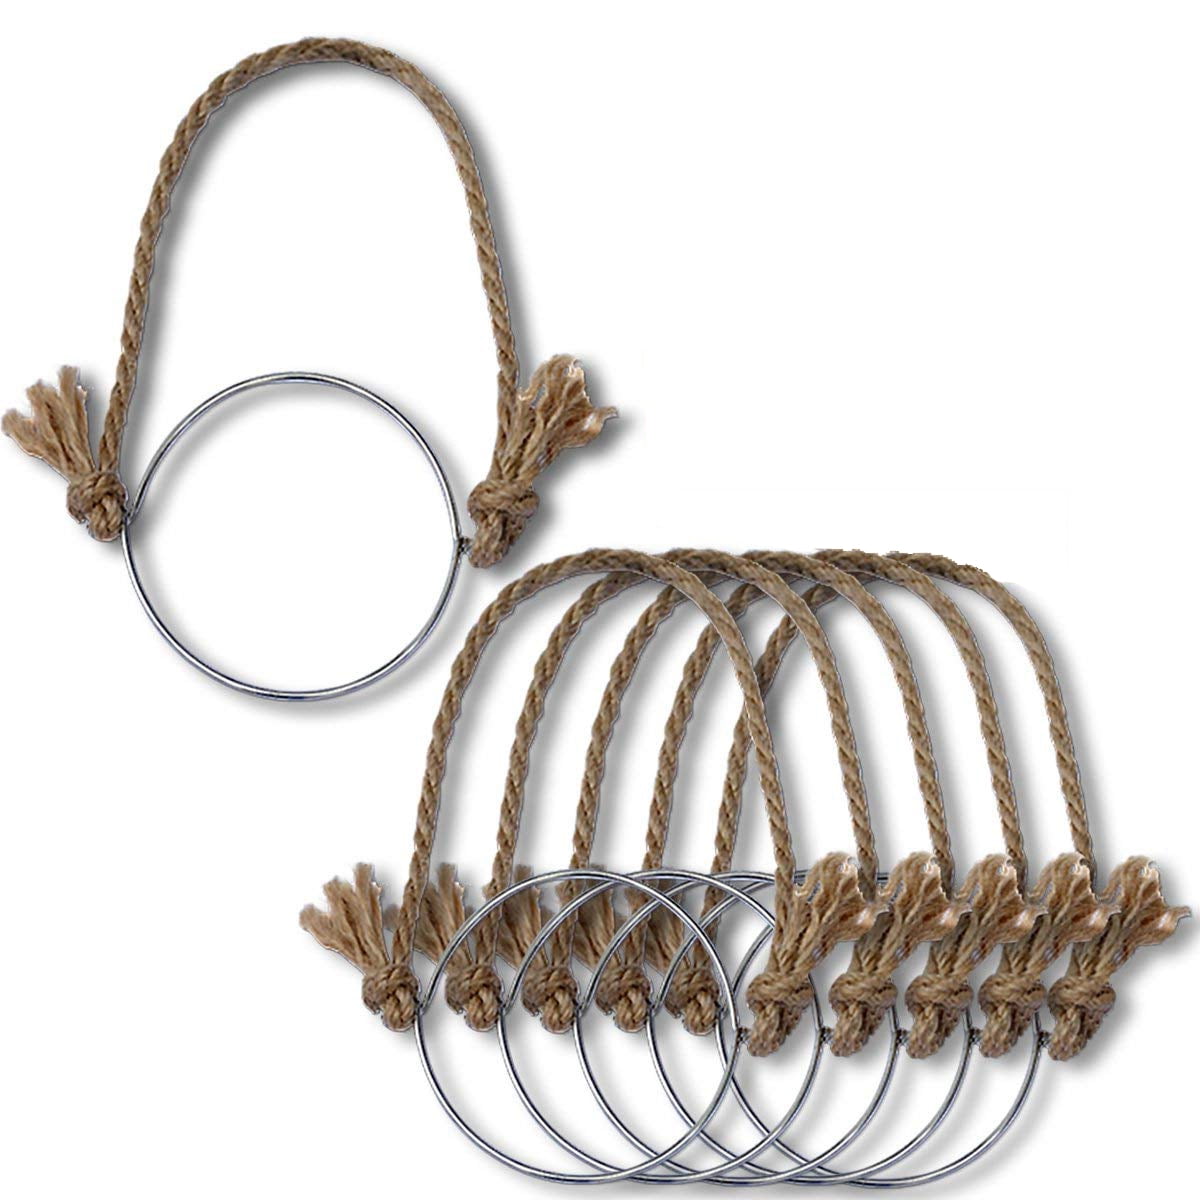 6Pack Burlap Wire Hangers Stainless Steel Handles For Mason Jar, Ball Pint Jar, Canning Jars